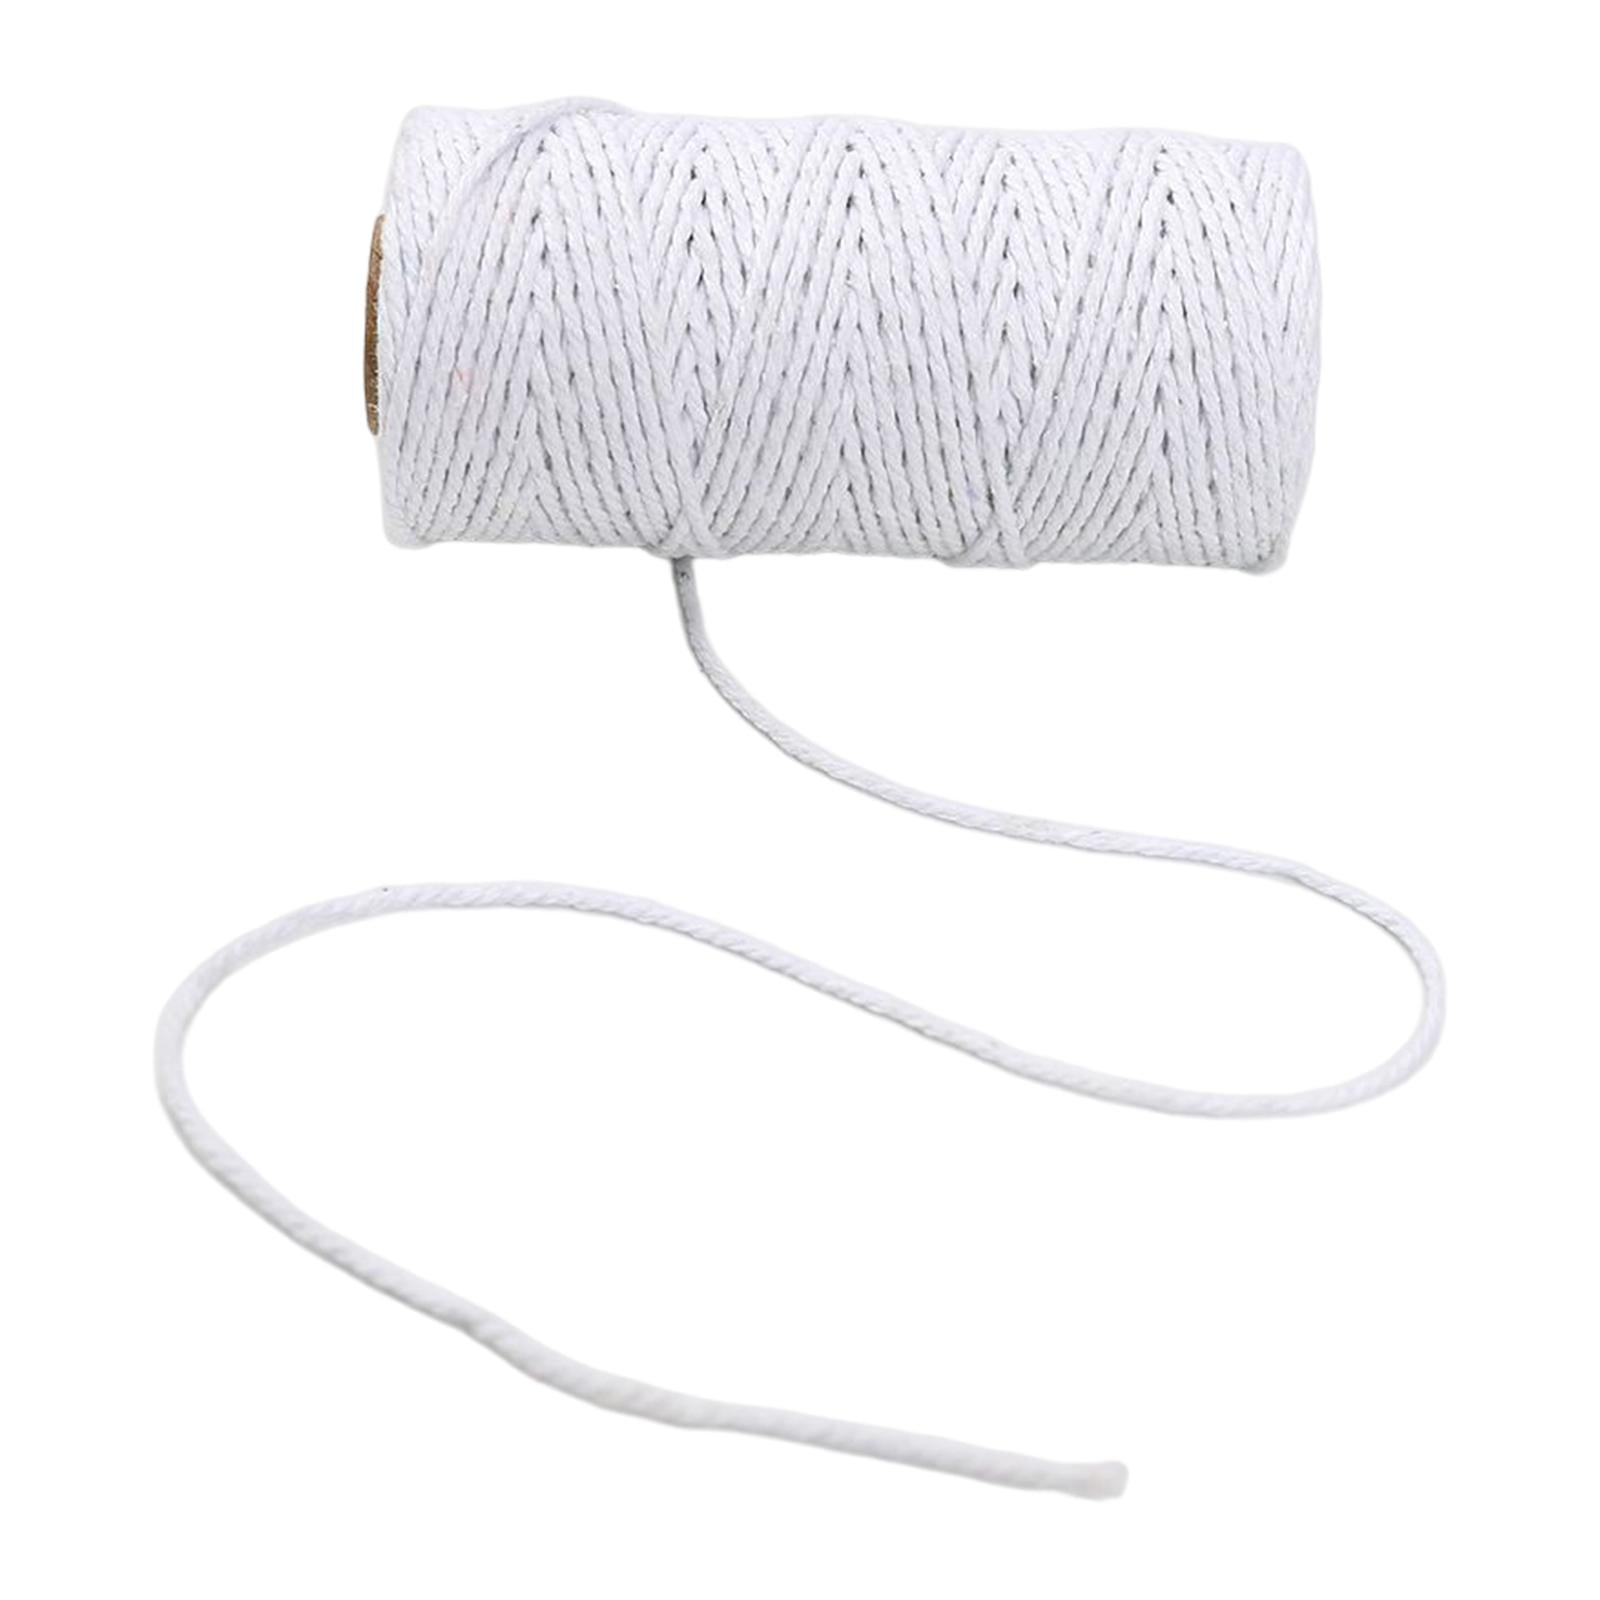 100 Meter/Roll Macrame Cord Rope Packing String for Crafts Home Artworks  Cooking White 